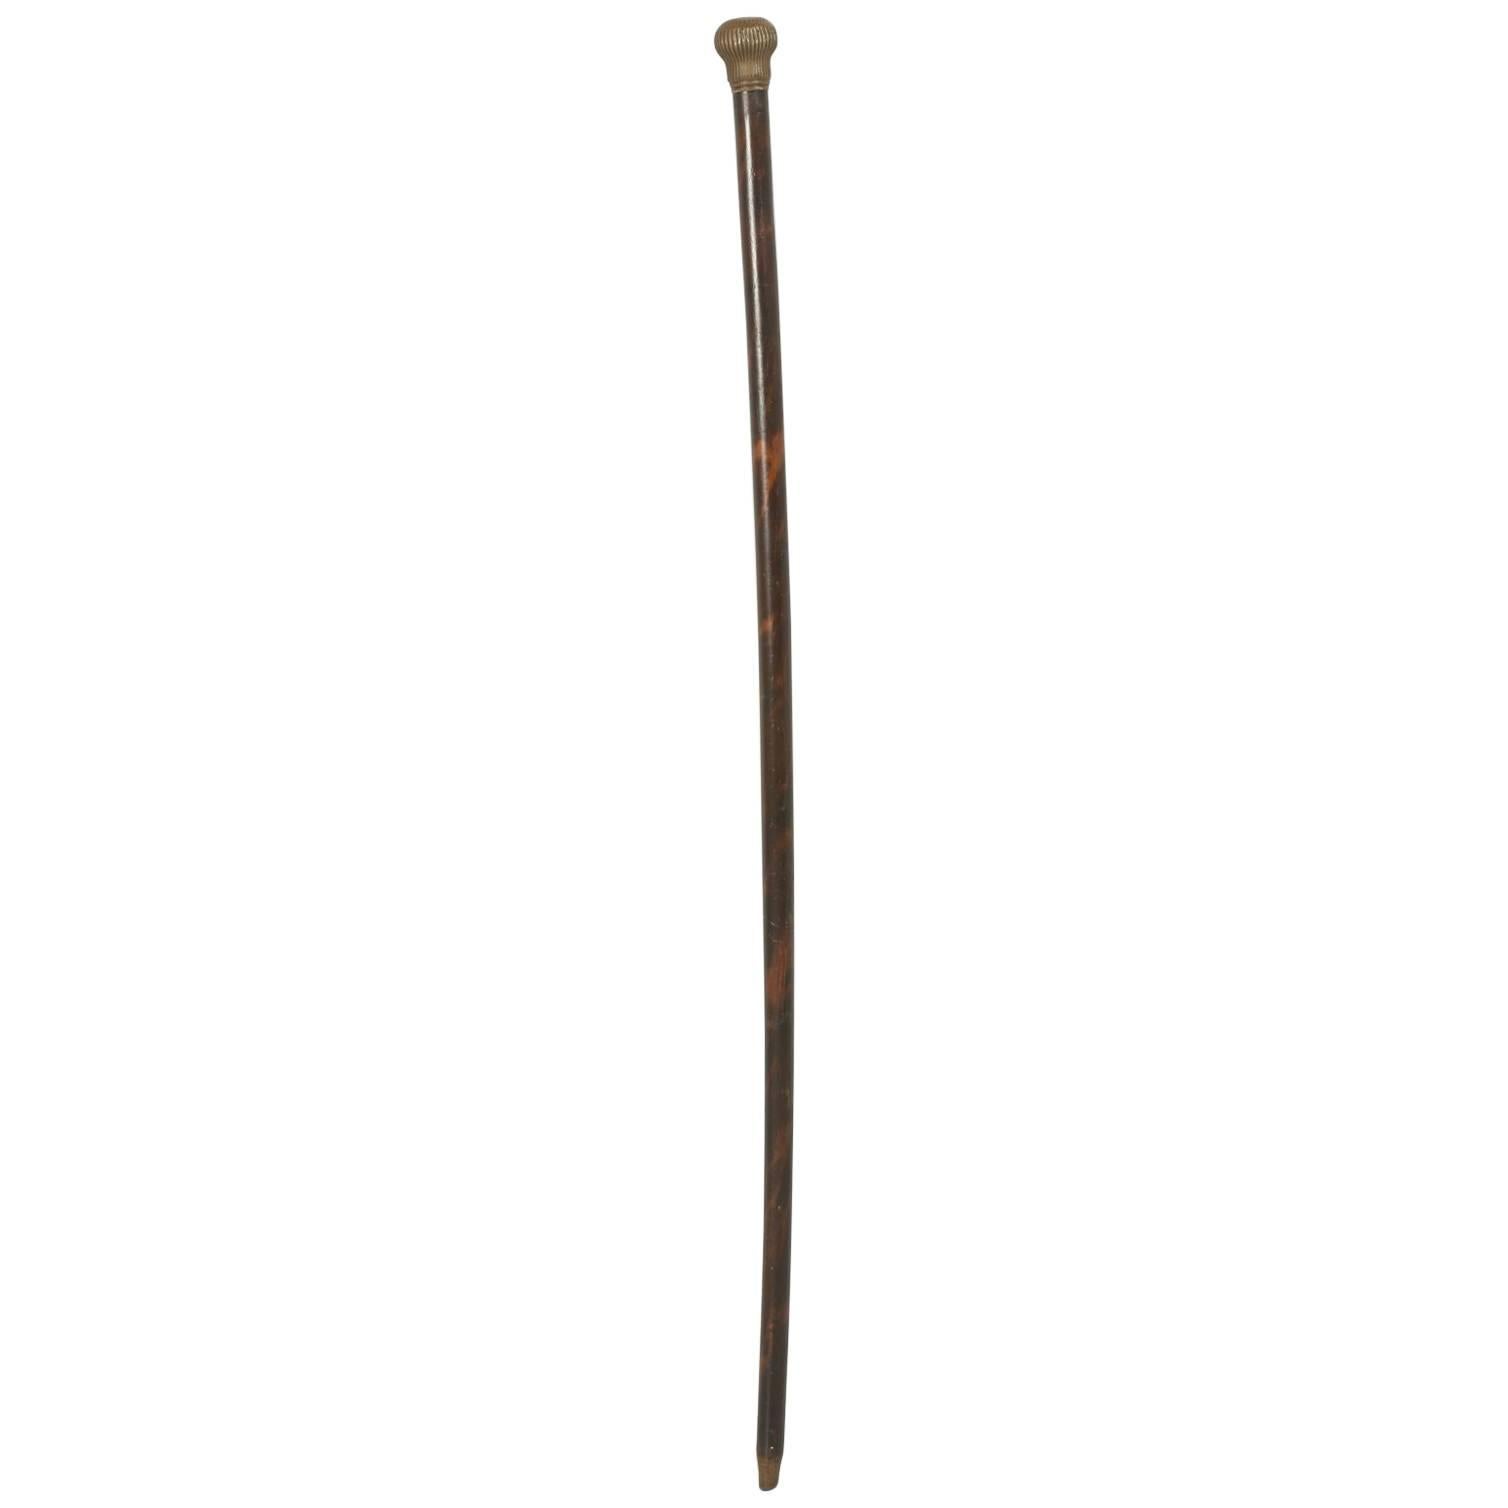 Antique French Walking Stick or Cane